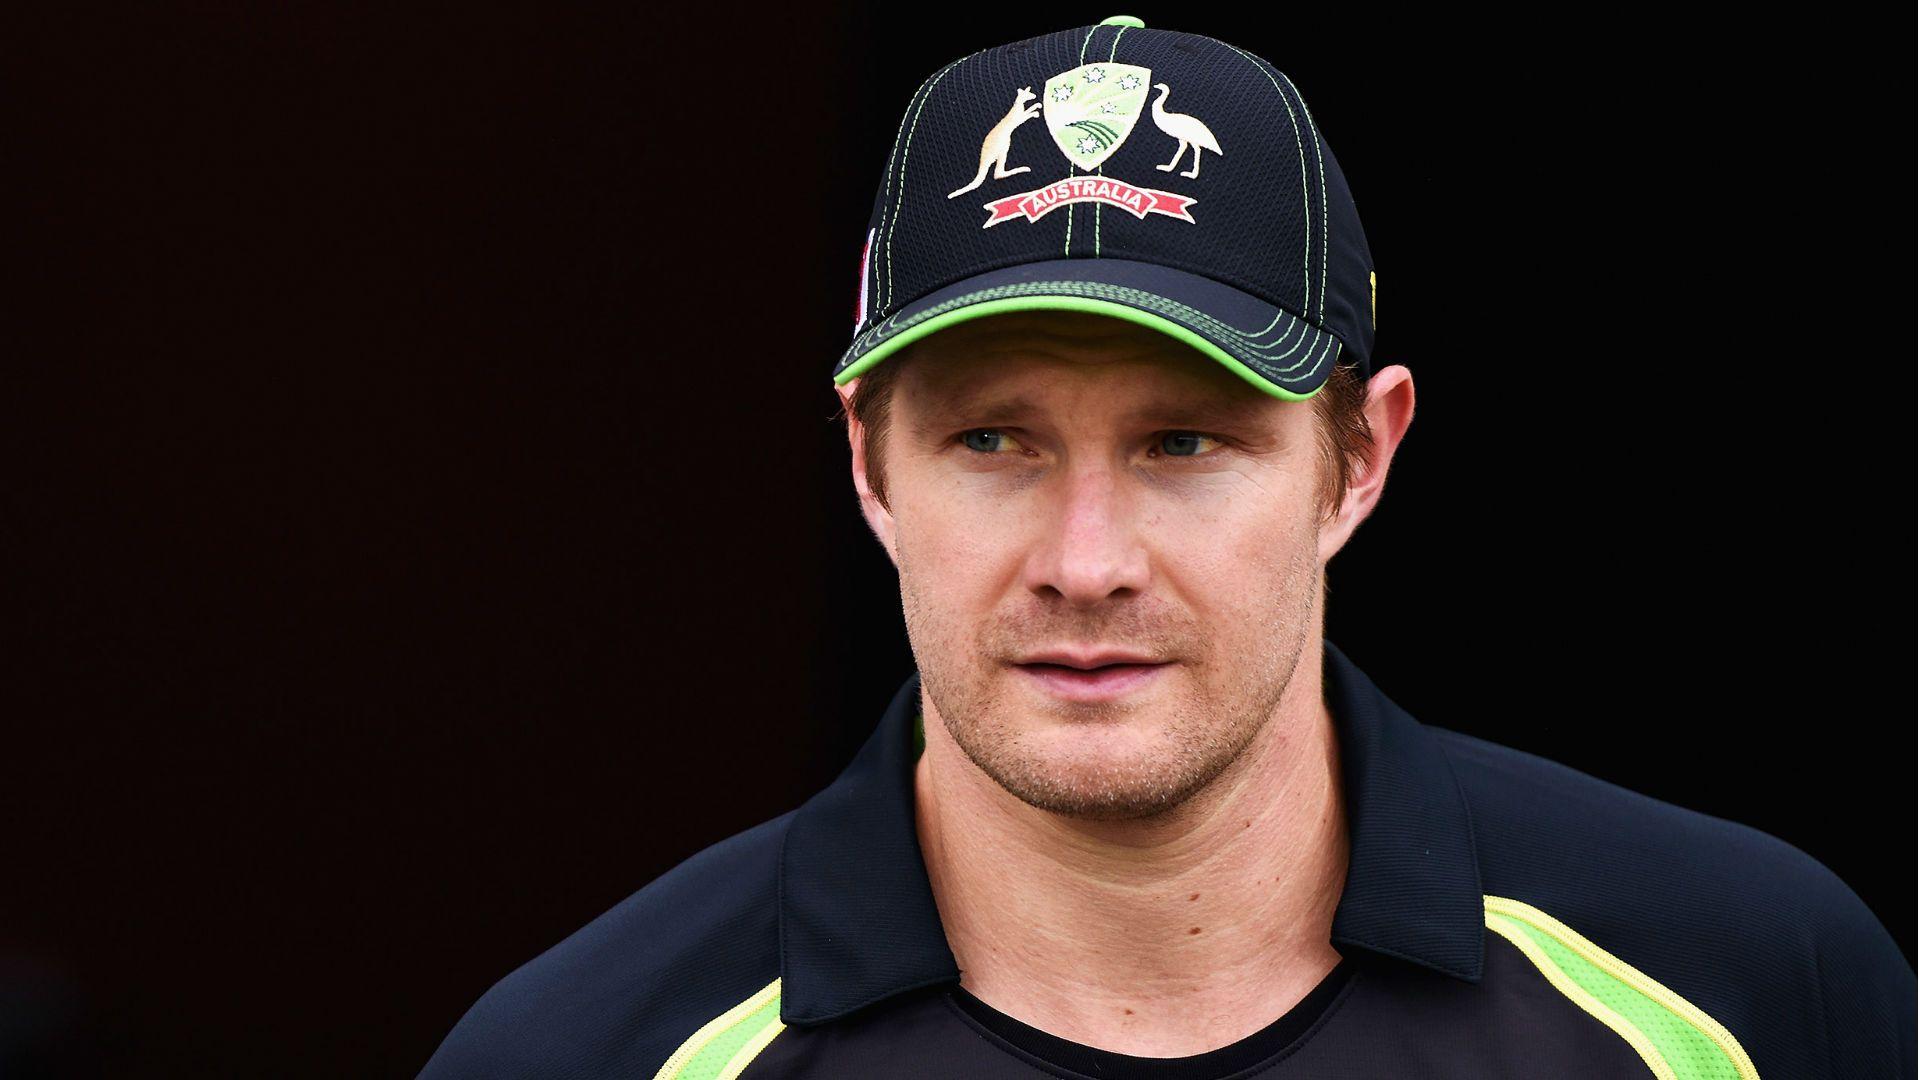 Watson's T20 World Cup preparation takes huge body blow. Cricket